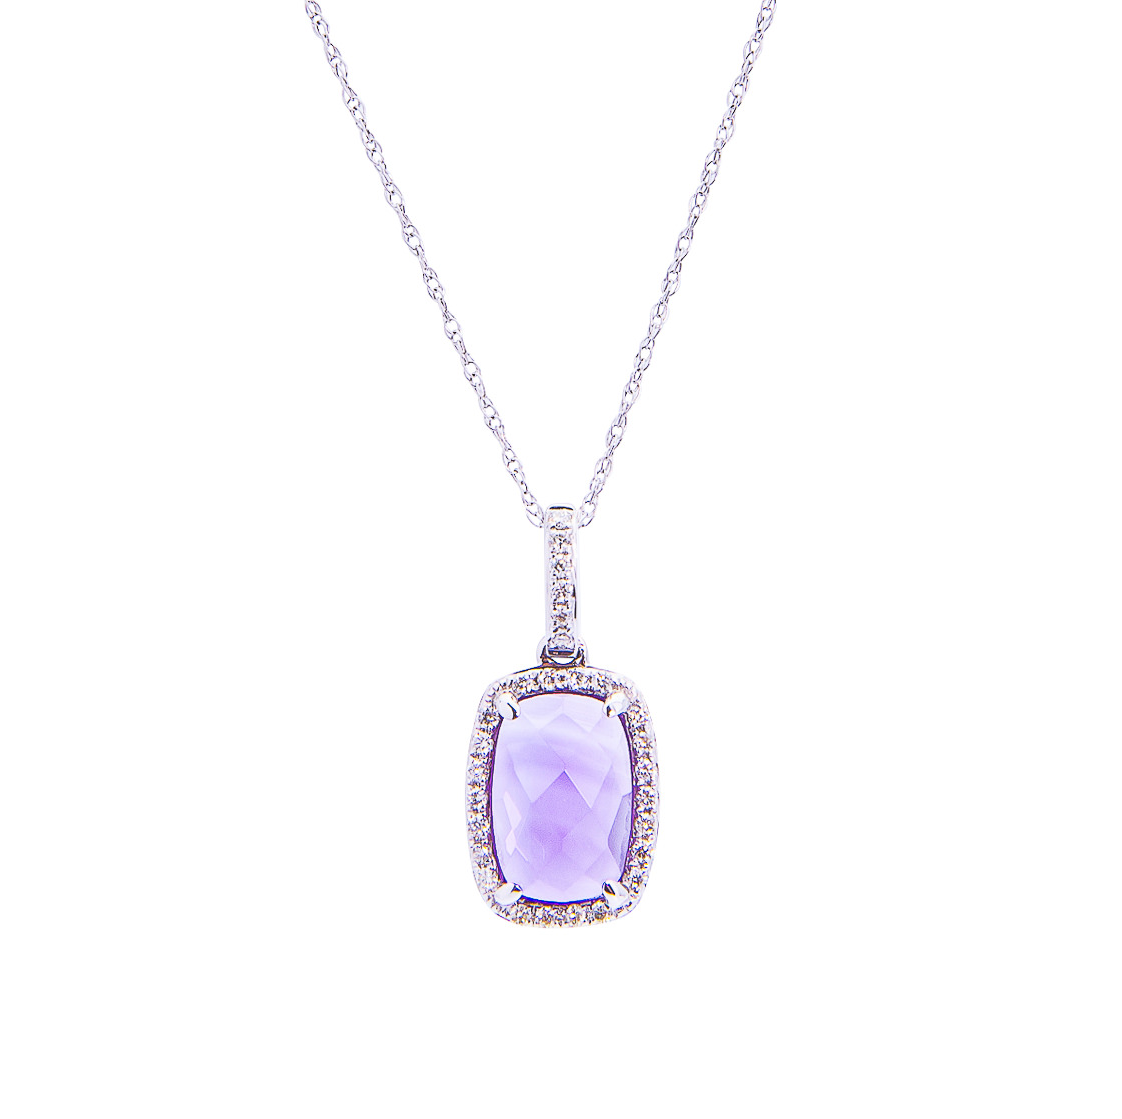 Sabel Collection 14K White Gold Cushion Cut Amethyst and Diamond Pendant